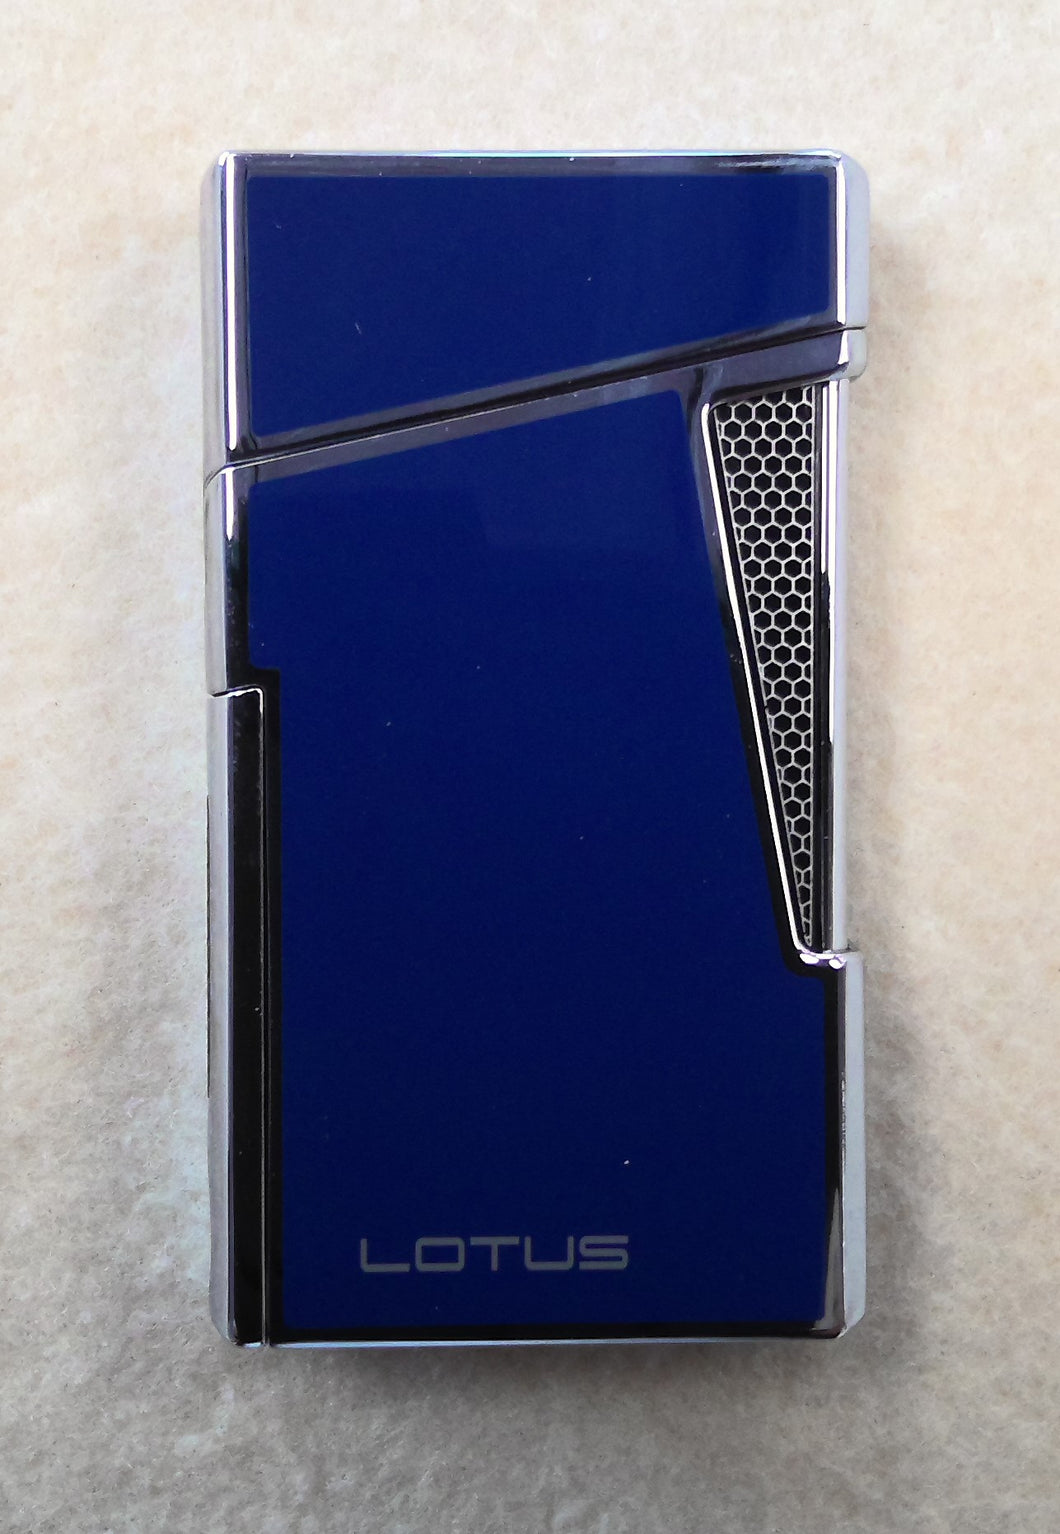 Lotus 48 Twin Torch, Blue and Chrome